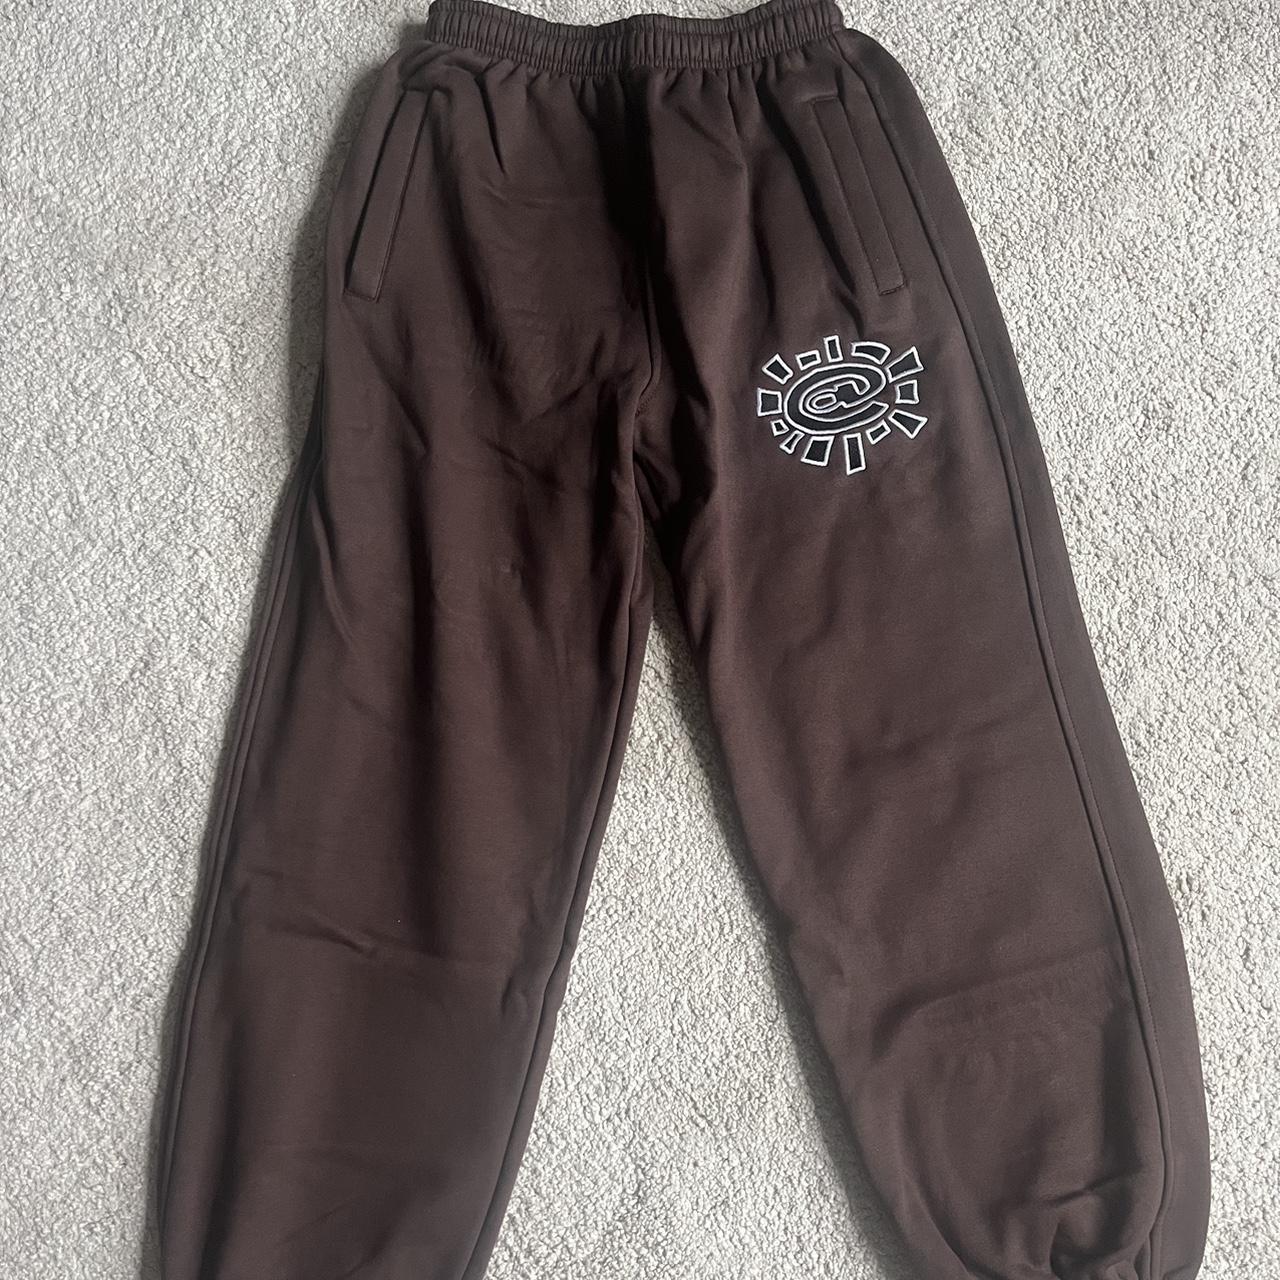 rel@xed embroidered brown jogger – always do what you should do